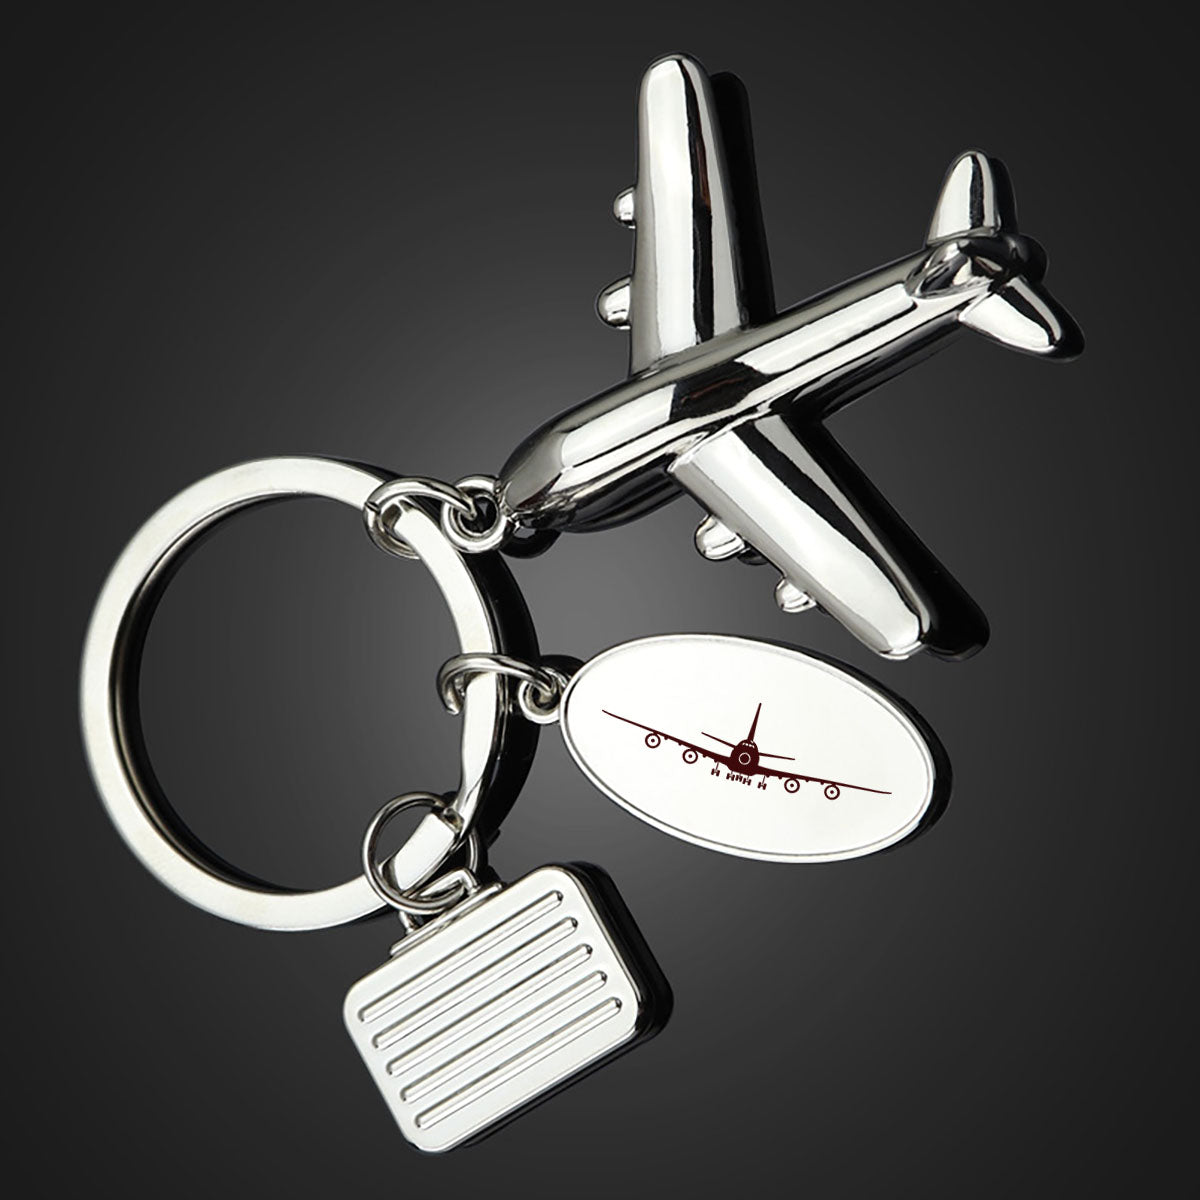 Boeing 747 Silhouette Designed Suitcase Airplane Key Chains